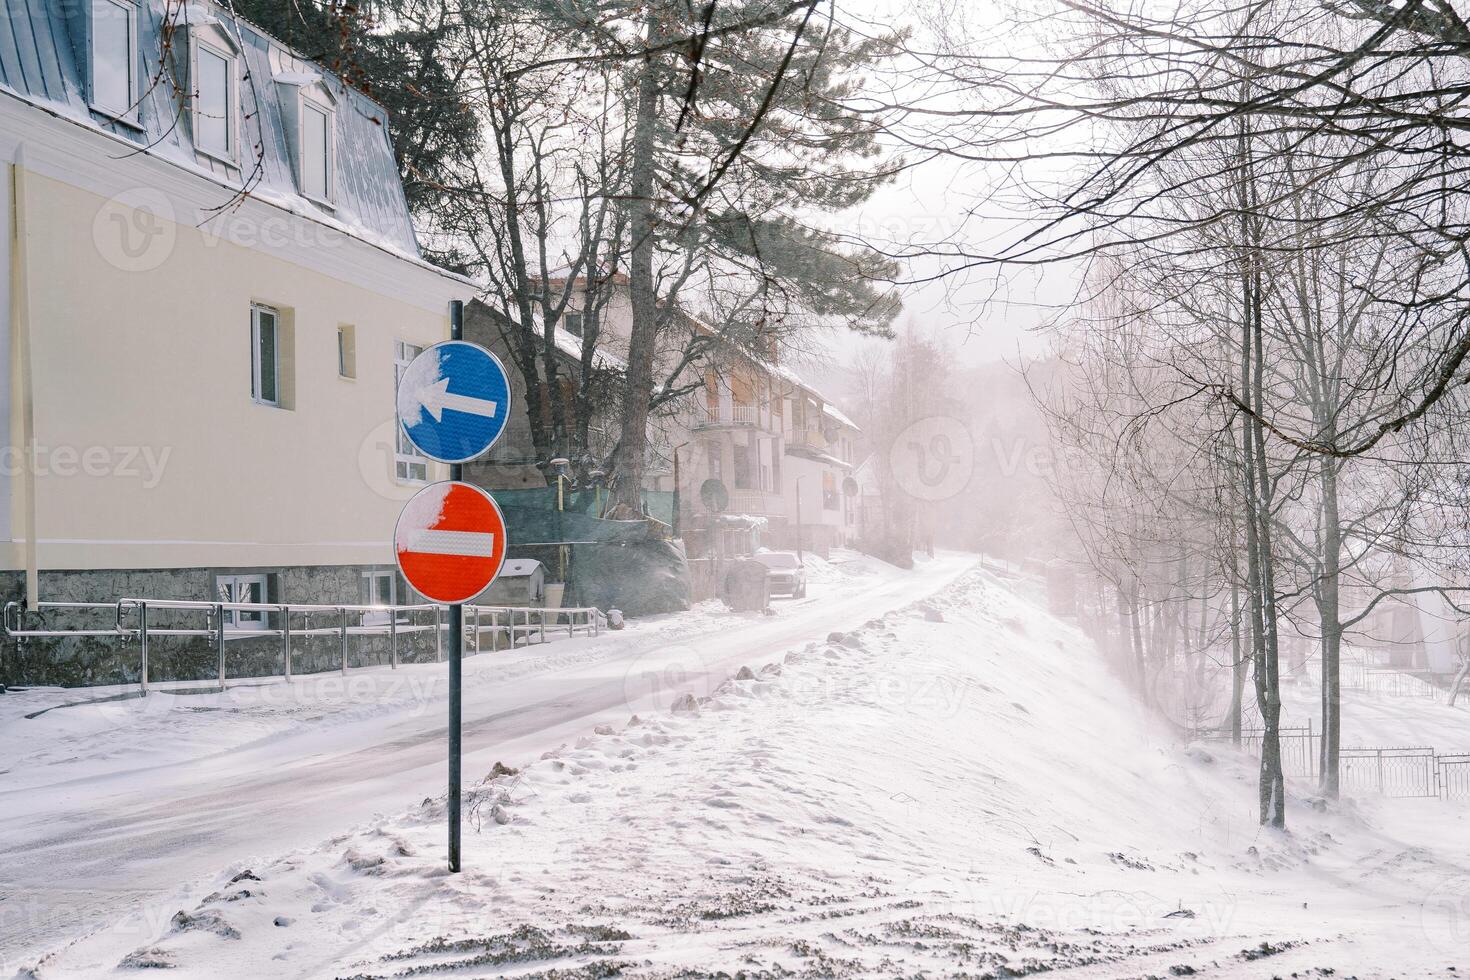 Stop and detour road signs stand on a snowy street near a building photo